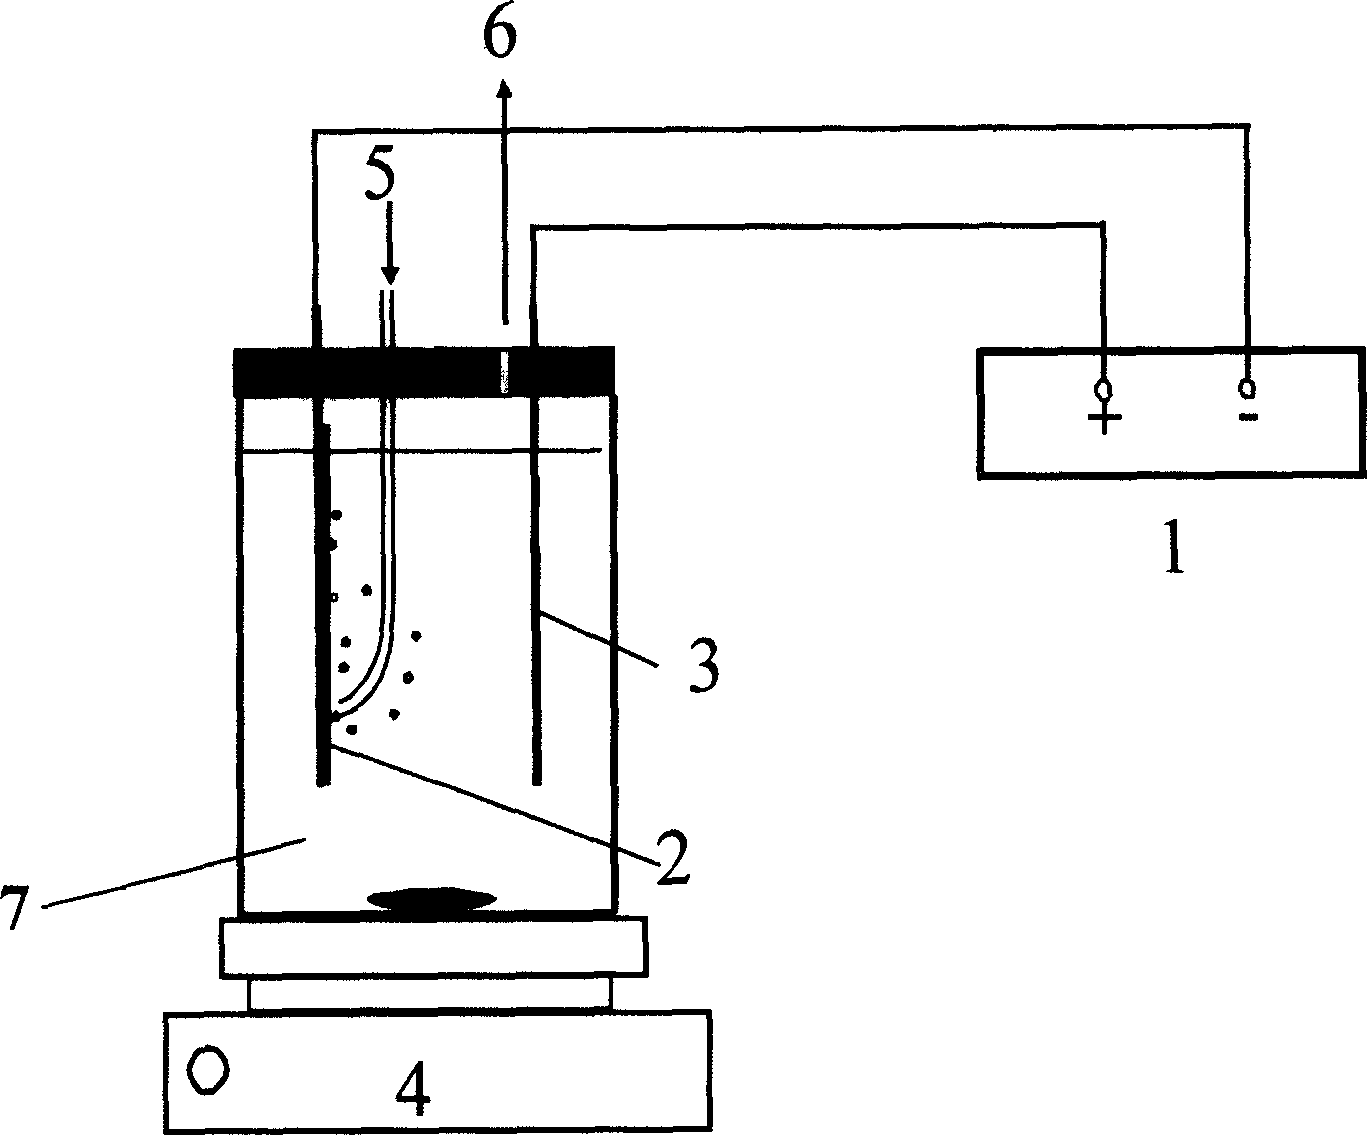 Electro-Fenton method and apparatus for removing multi-algae toxins from water